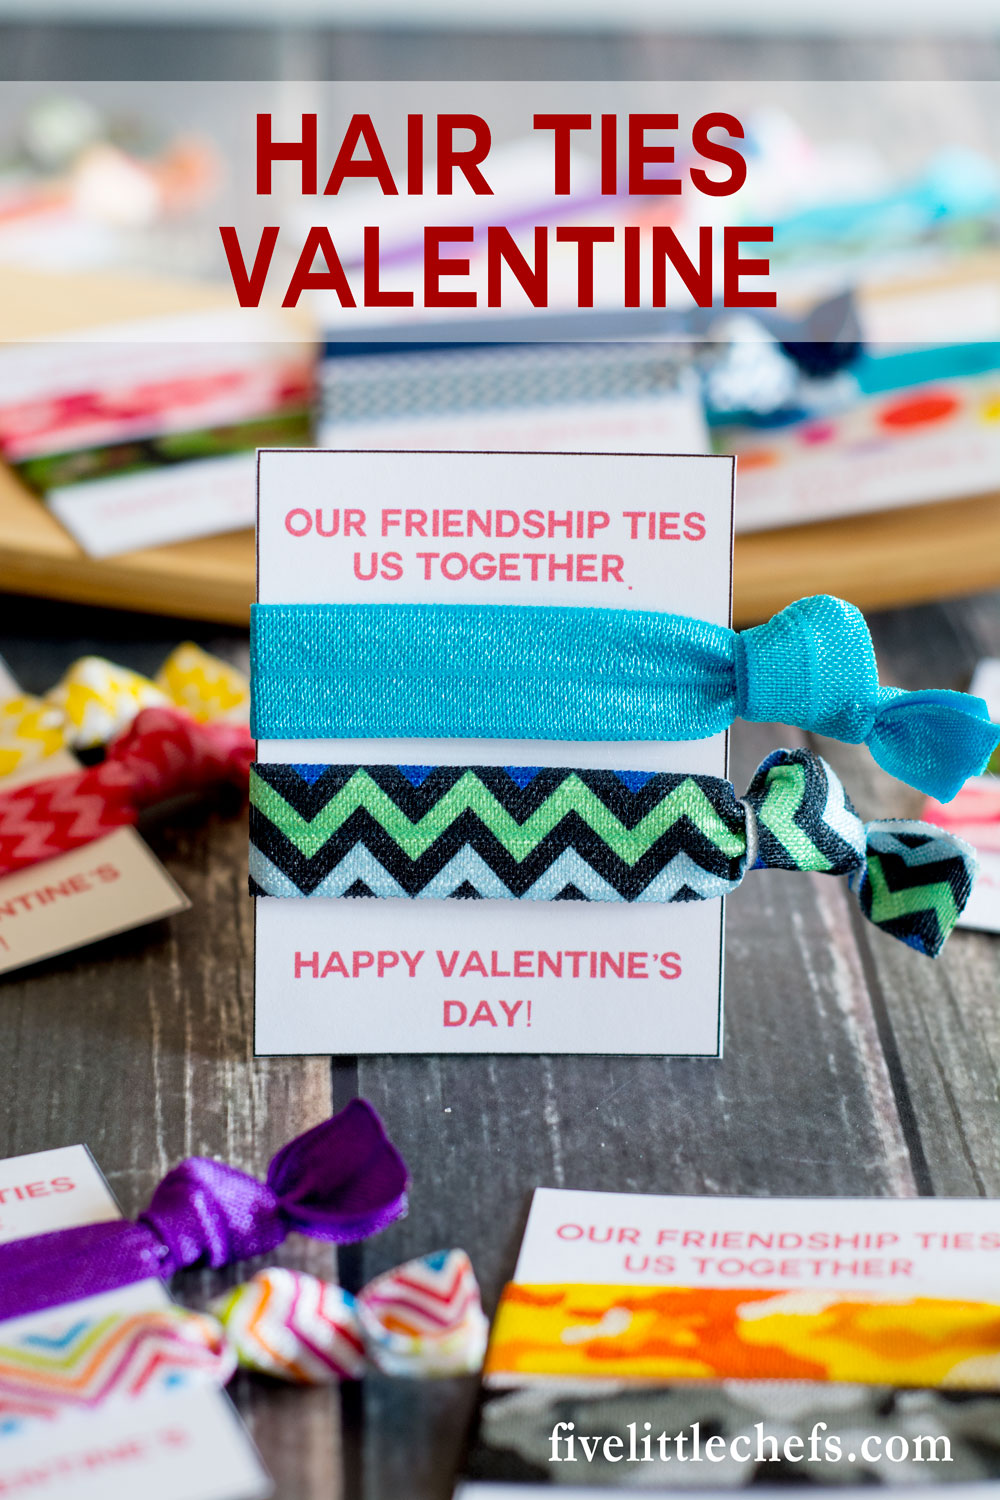 Hair ties classroom valentine ideas for kids are cute, cheap and easy. Use the printables then add a DIY no crease hair tie. A great valentine's day idea for friends and family. Works as a fun no candy option for school.